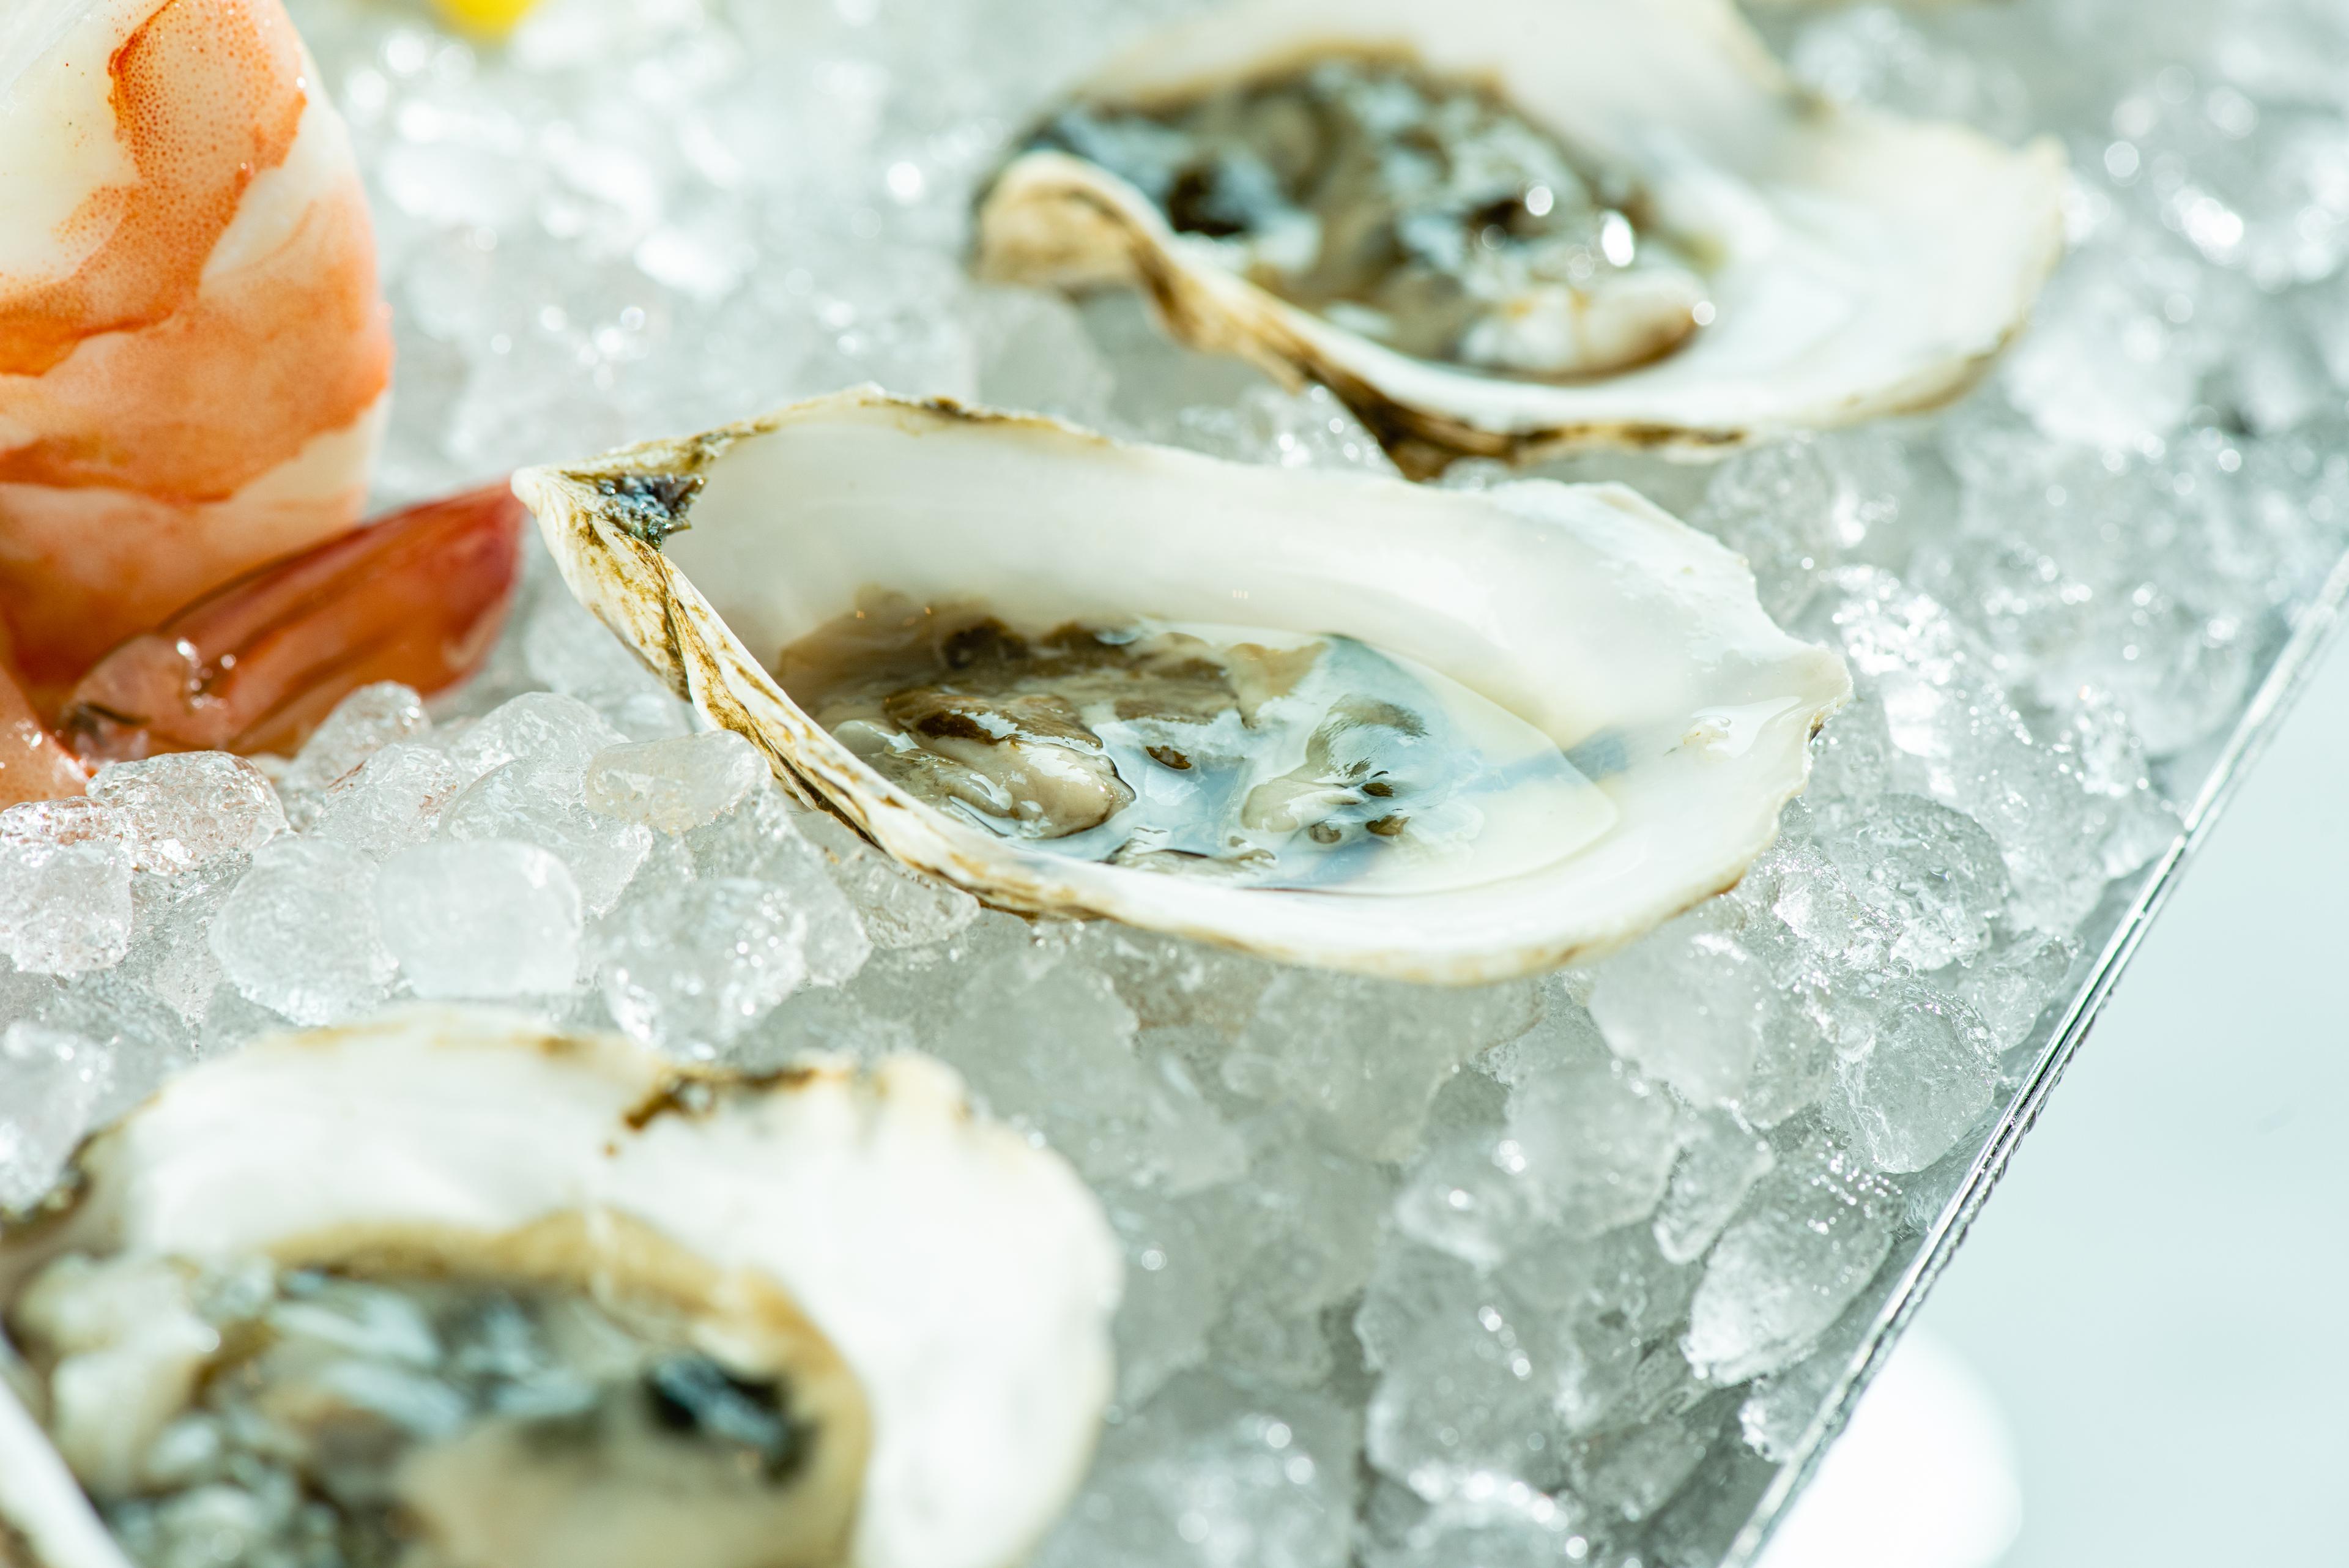 Enjoy $1 Oysters at MaryGold’s by Brad Kilgore